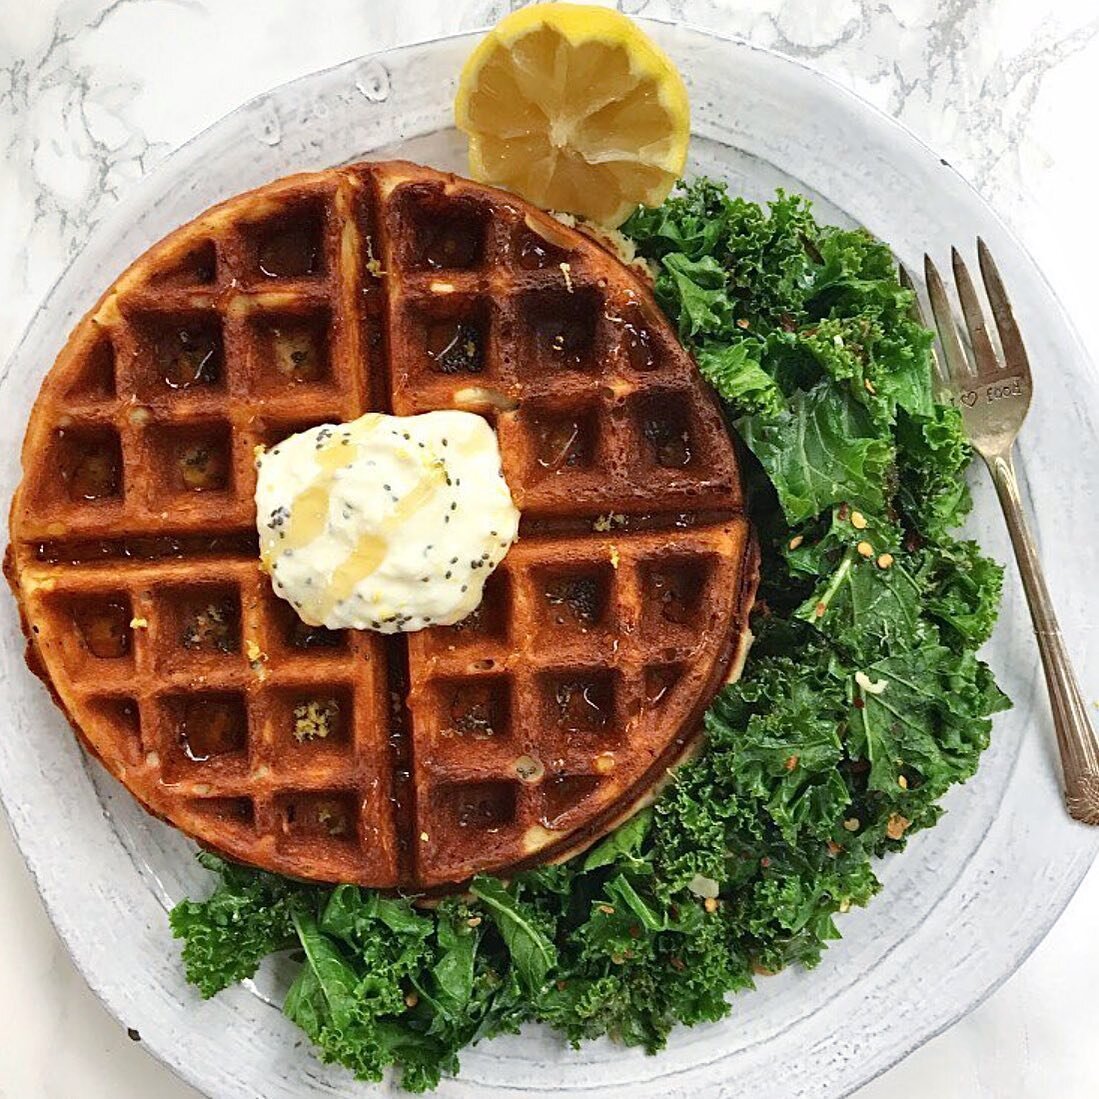 When #NationalWaffleDay falls as summer&rsquo;s coming to a close, there&rsquo;s no better way to celebrate than with this lemon poppyseed Greek yogurt waffle 🧇 It&rsquo;s one of my favorite flavors from childhood in delicious waffle form. Plus this